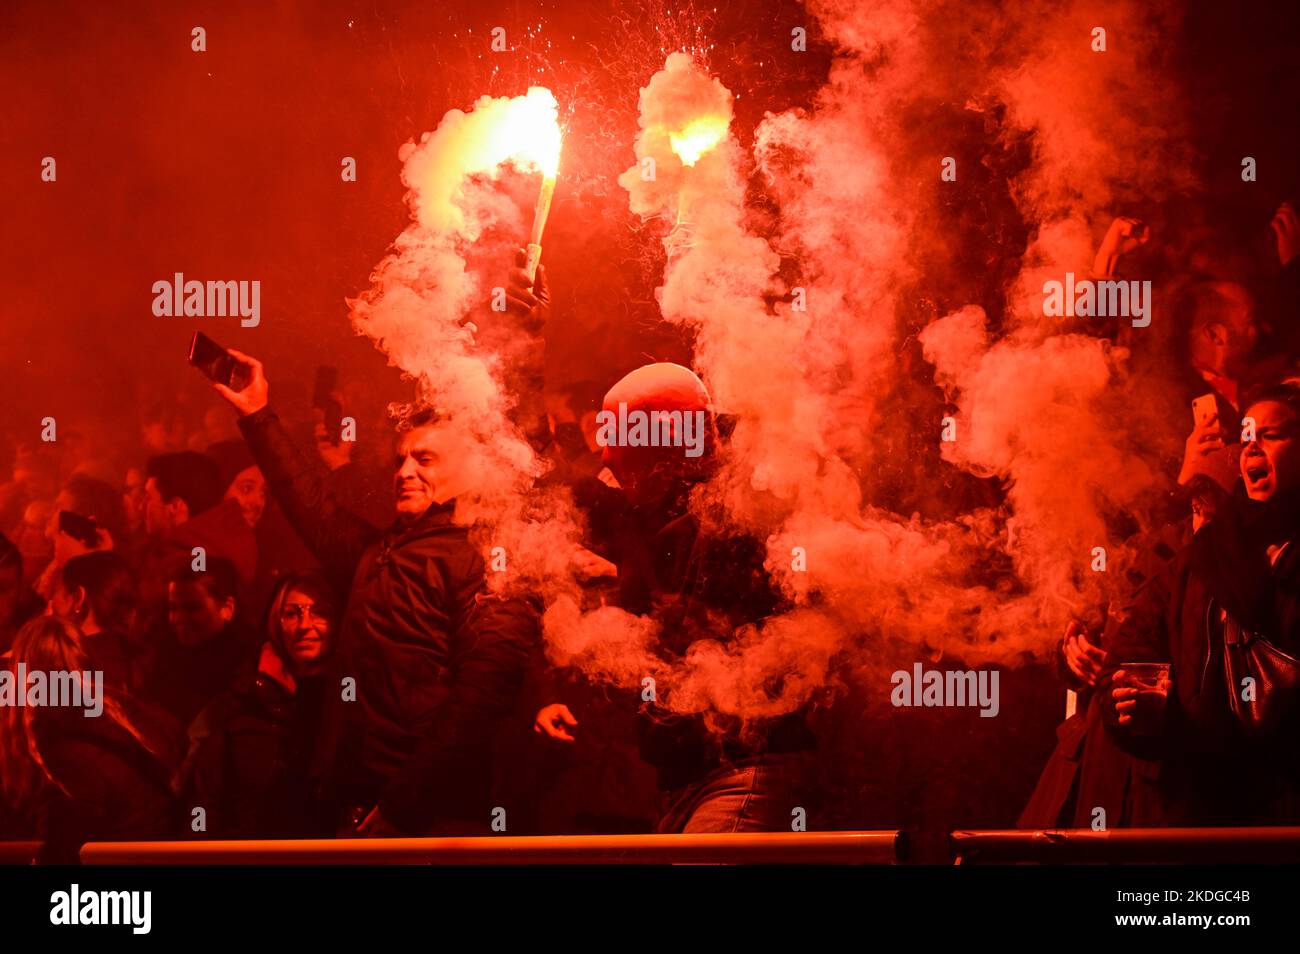 Antwerp's fans pictured during a soccer match between RAFC Antwerp and RSCA Anderlecht, Sunday 06 November 2022 in Antwerp, on day 16 of the 2022-2023 'Jupiler Pro League' first division of the Belgian championship. BELGA PHOTO TOM GOYVAERTS Stock Photo